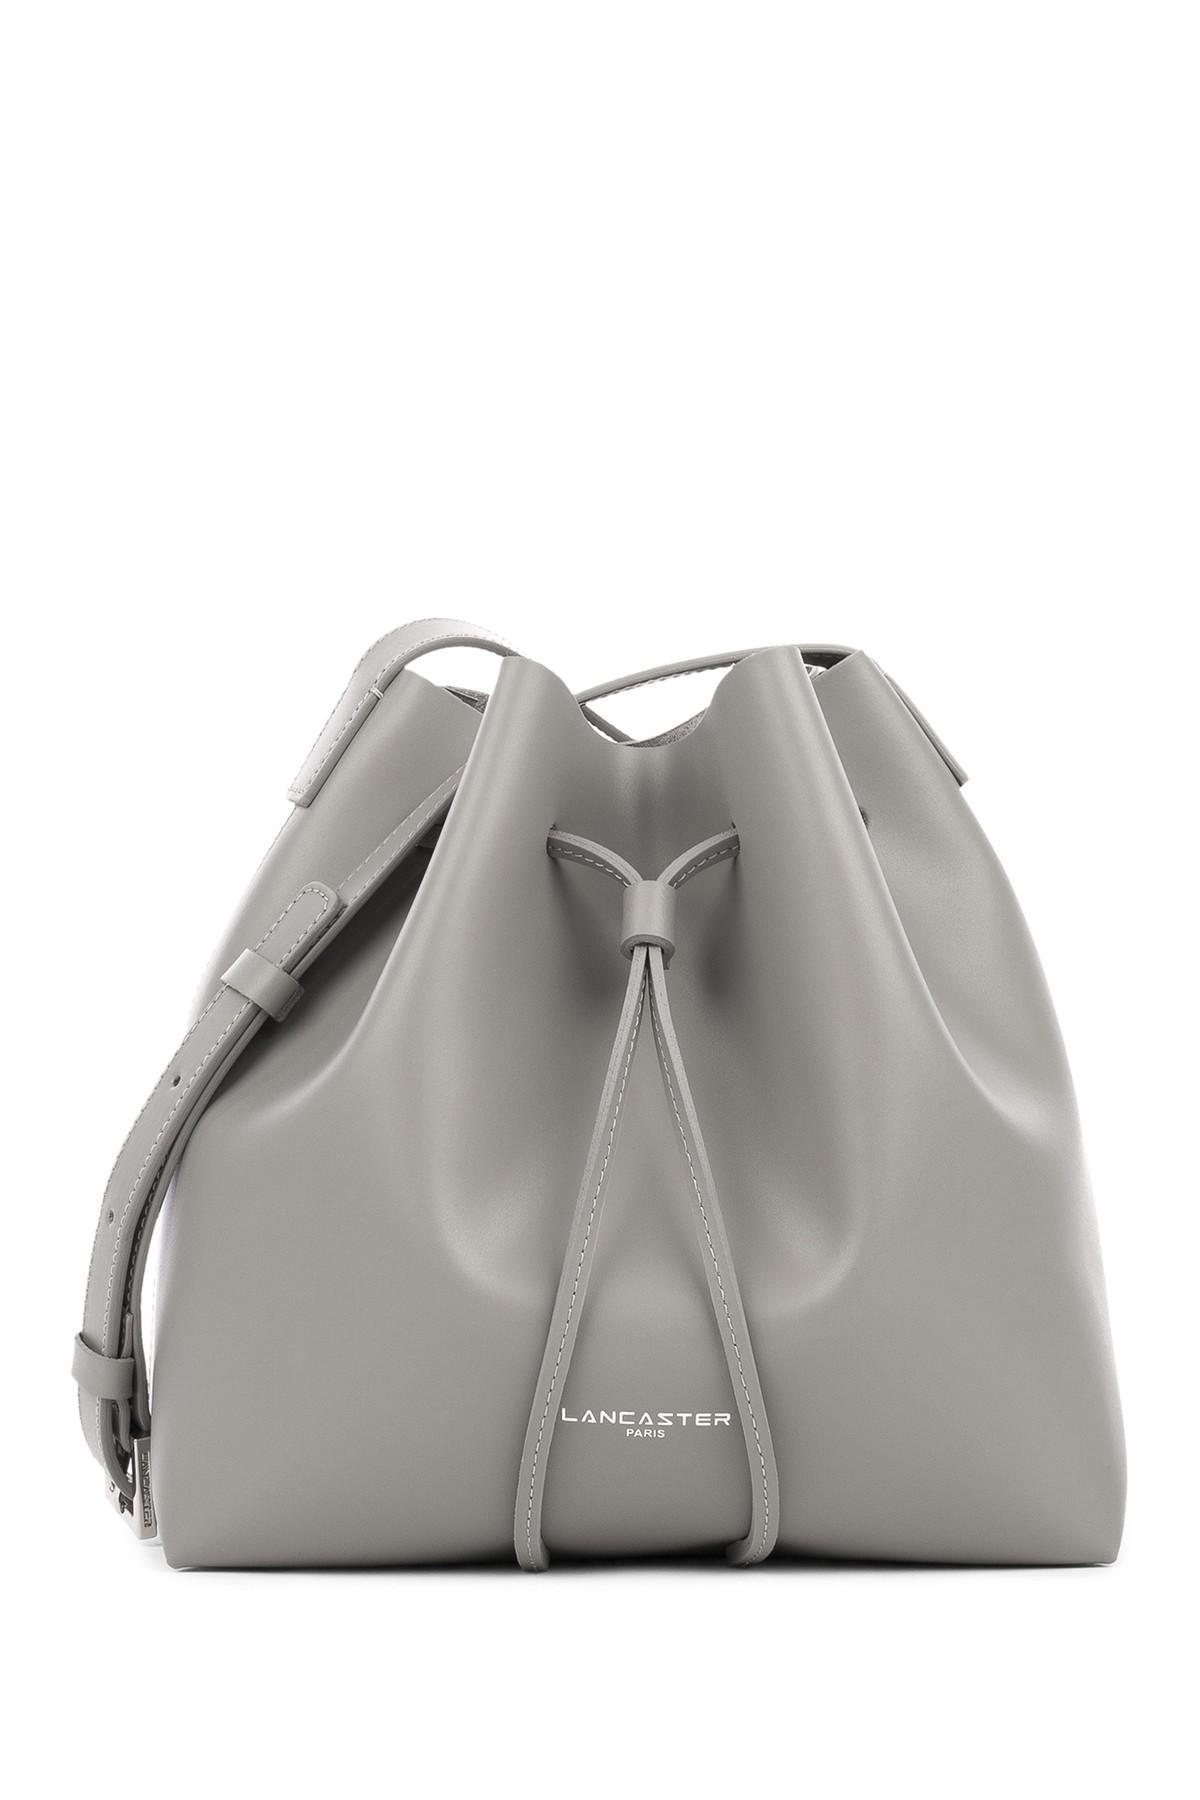 Lancaster Paris Leather Pur Smooth Bucket Bag in Gray - Lyst